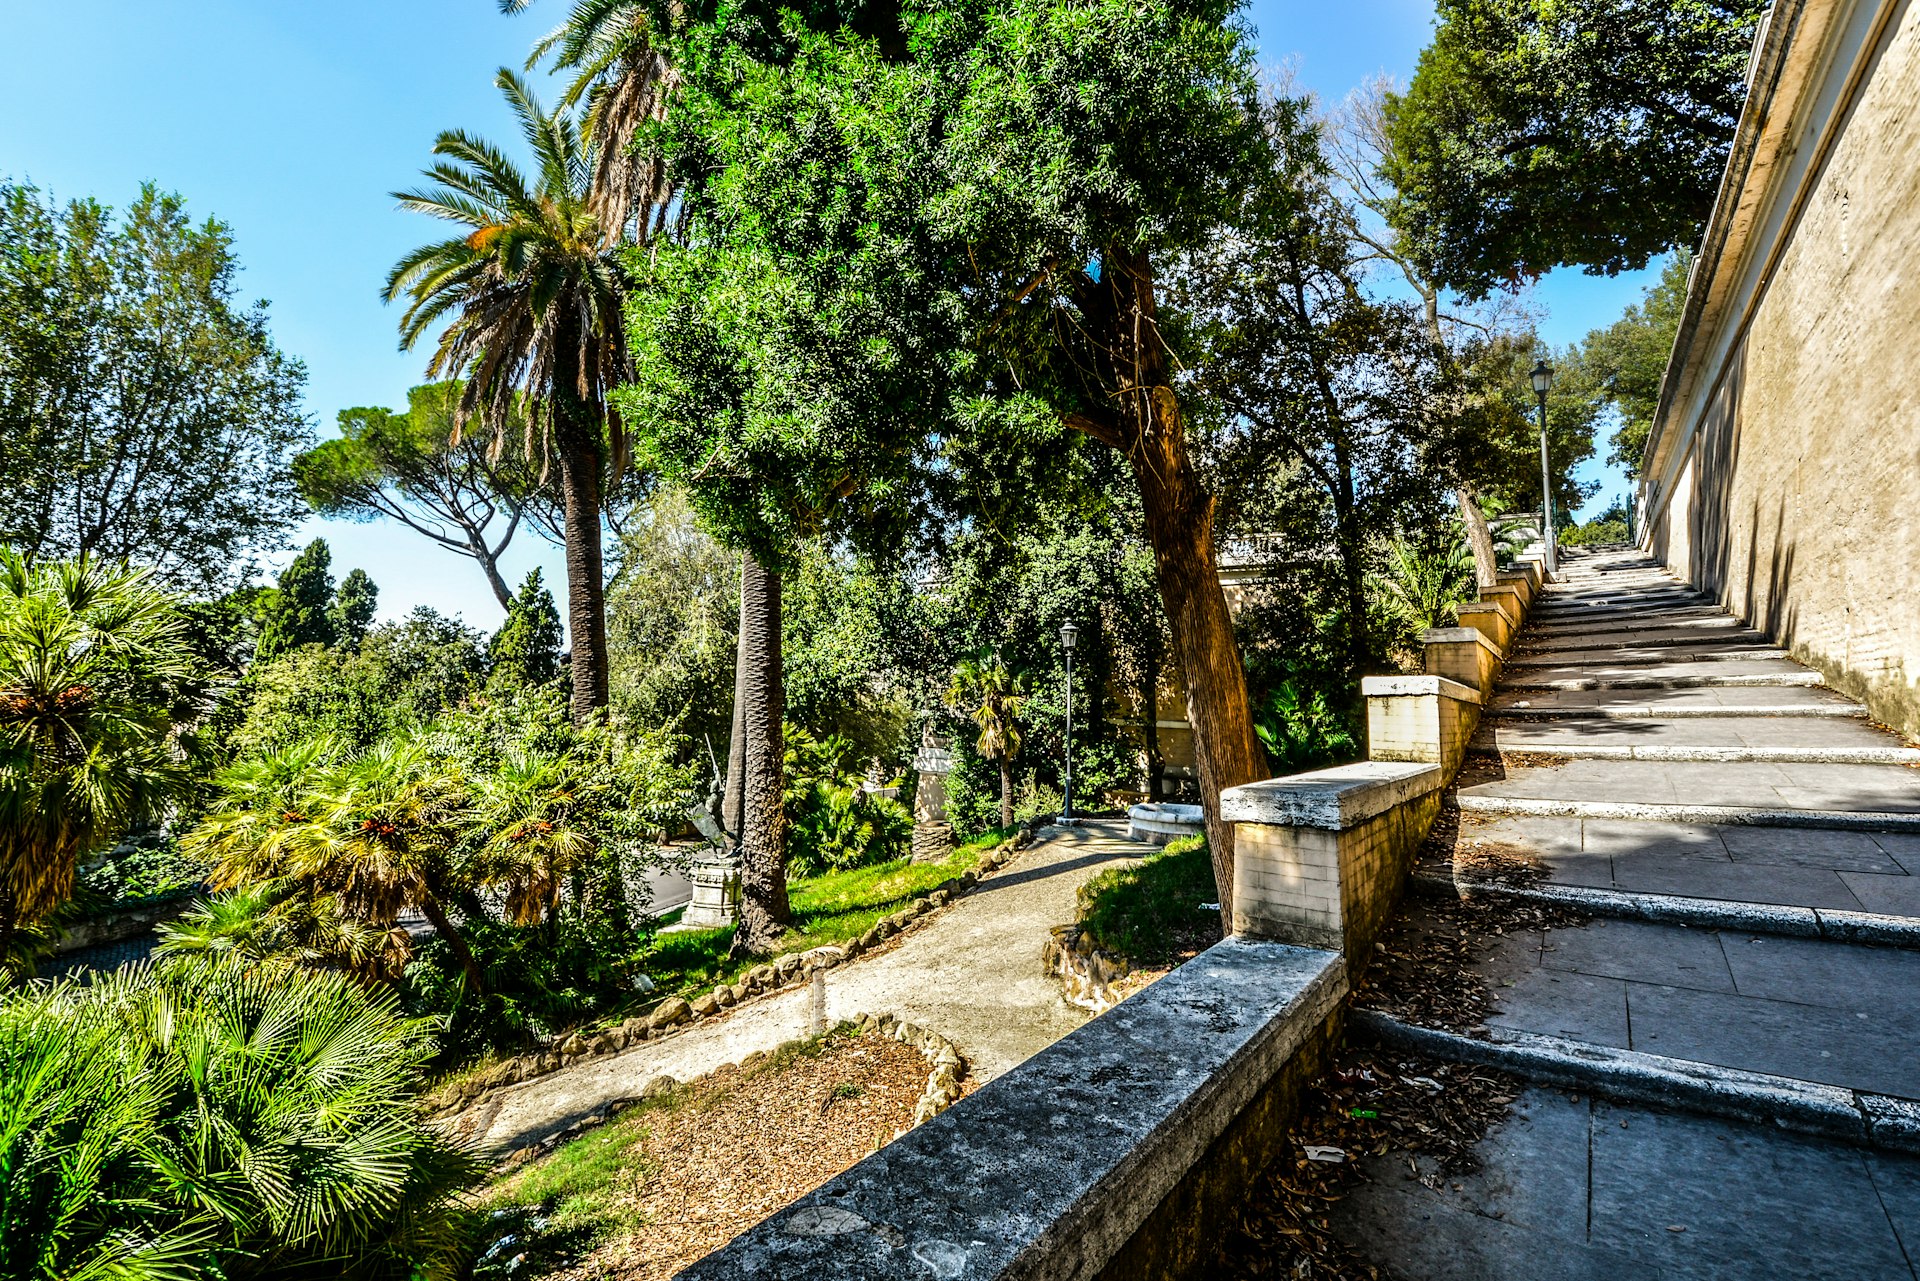 The path from the Piazza del Popolo to the Village Borghese and Borghese Gardens